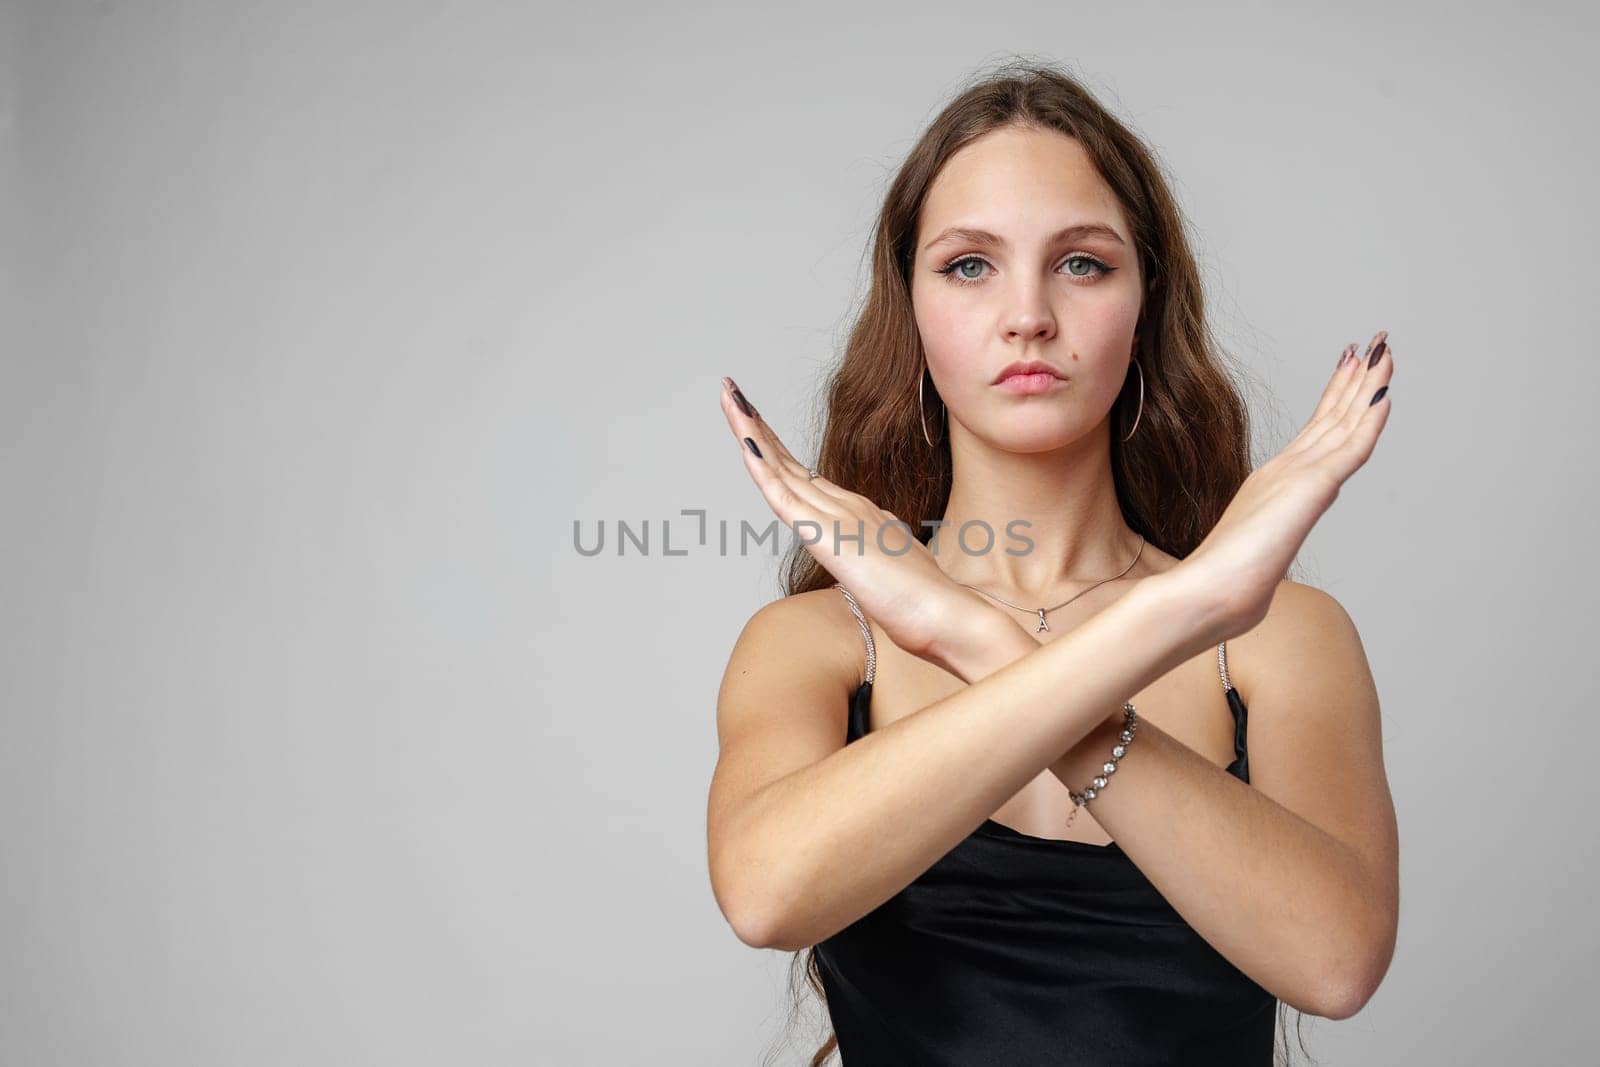 Young Woman in Elegant Black Dress Making an X Sign With Her Arms Against a Grey Background by Fabrikasimf